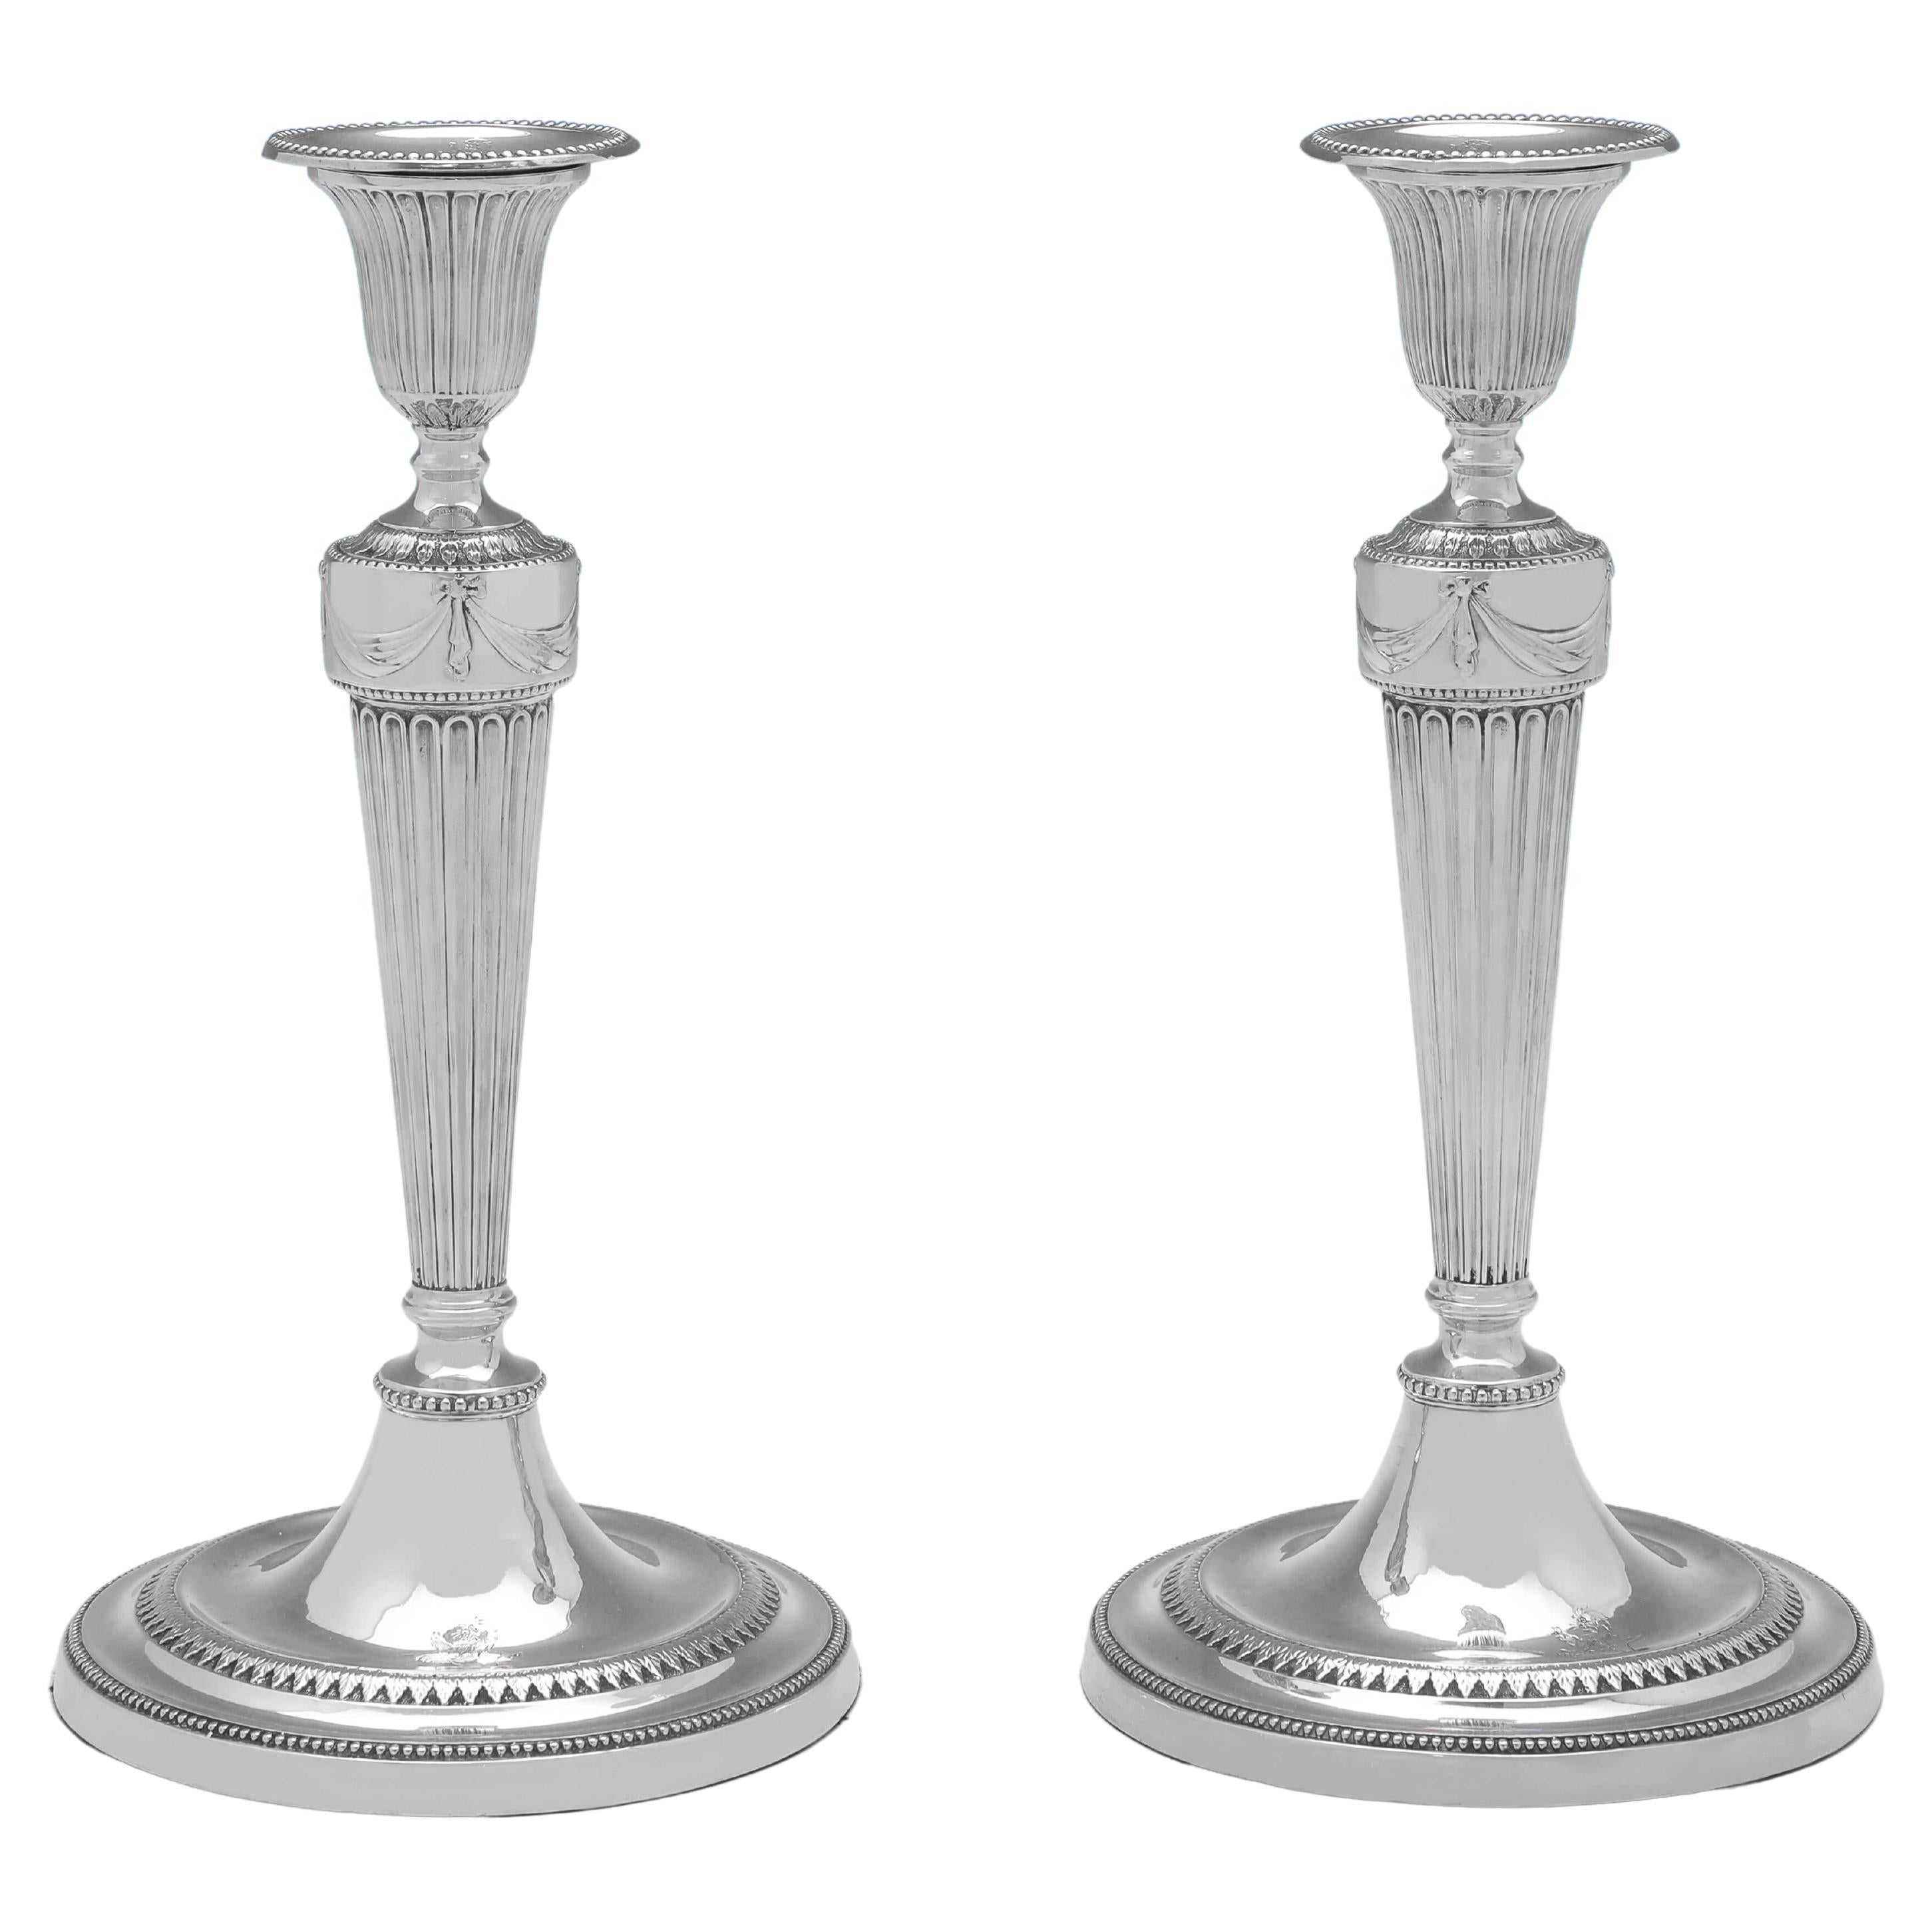 George III Pair of Neoclassical Antique Sterling Silver Candlesticks, Made 1781